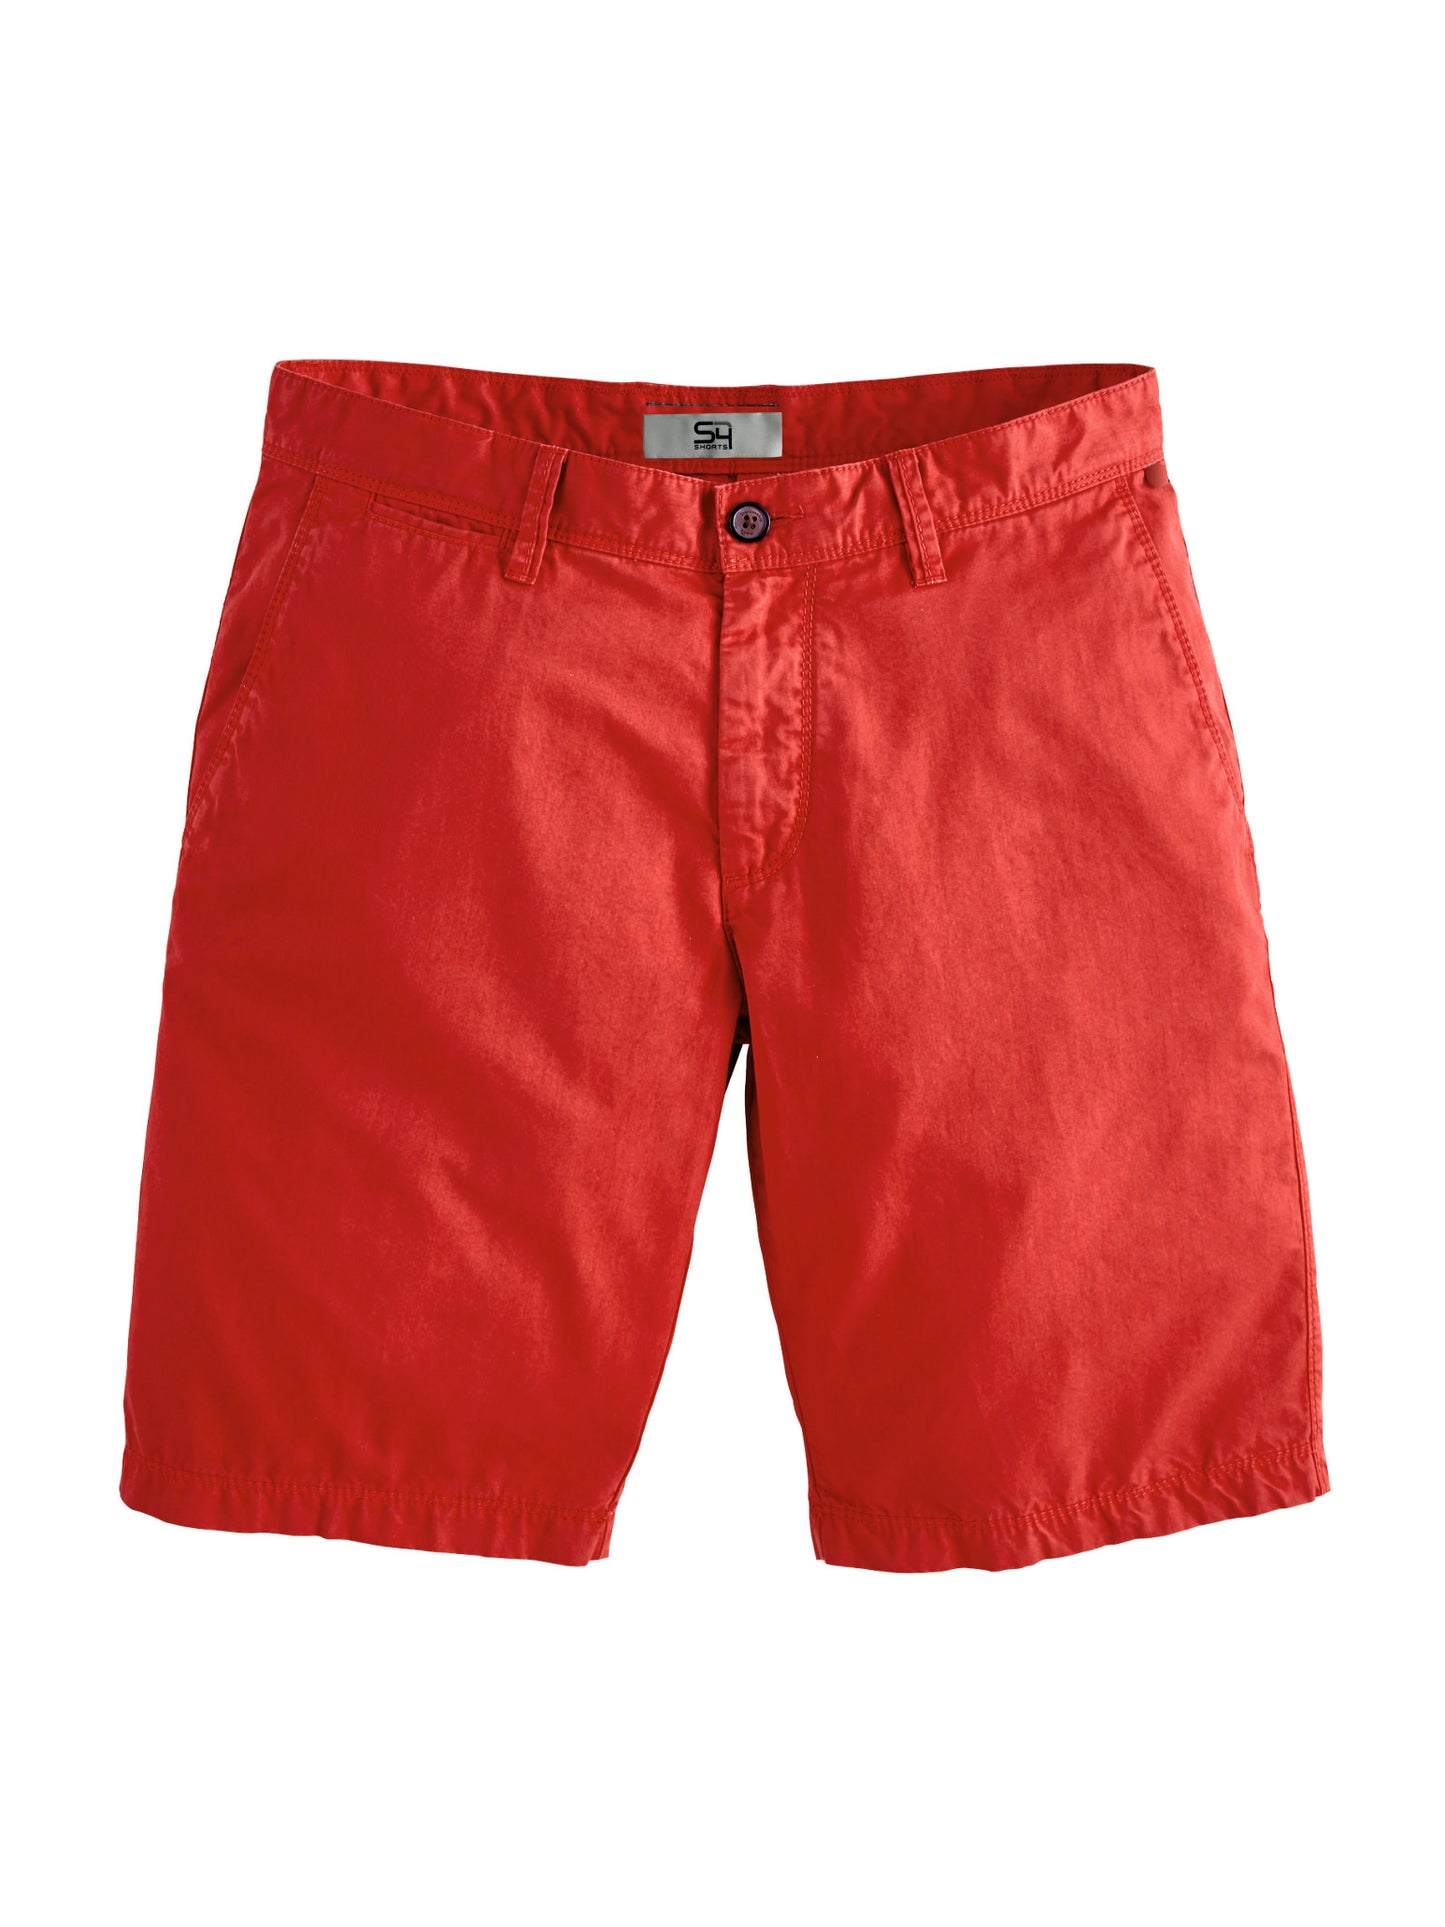 Shorts in red print by S4